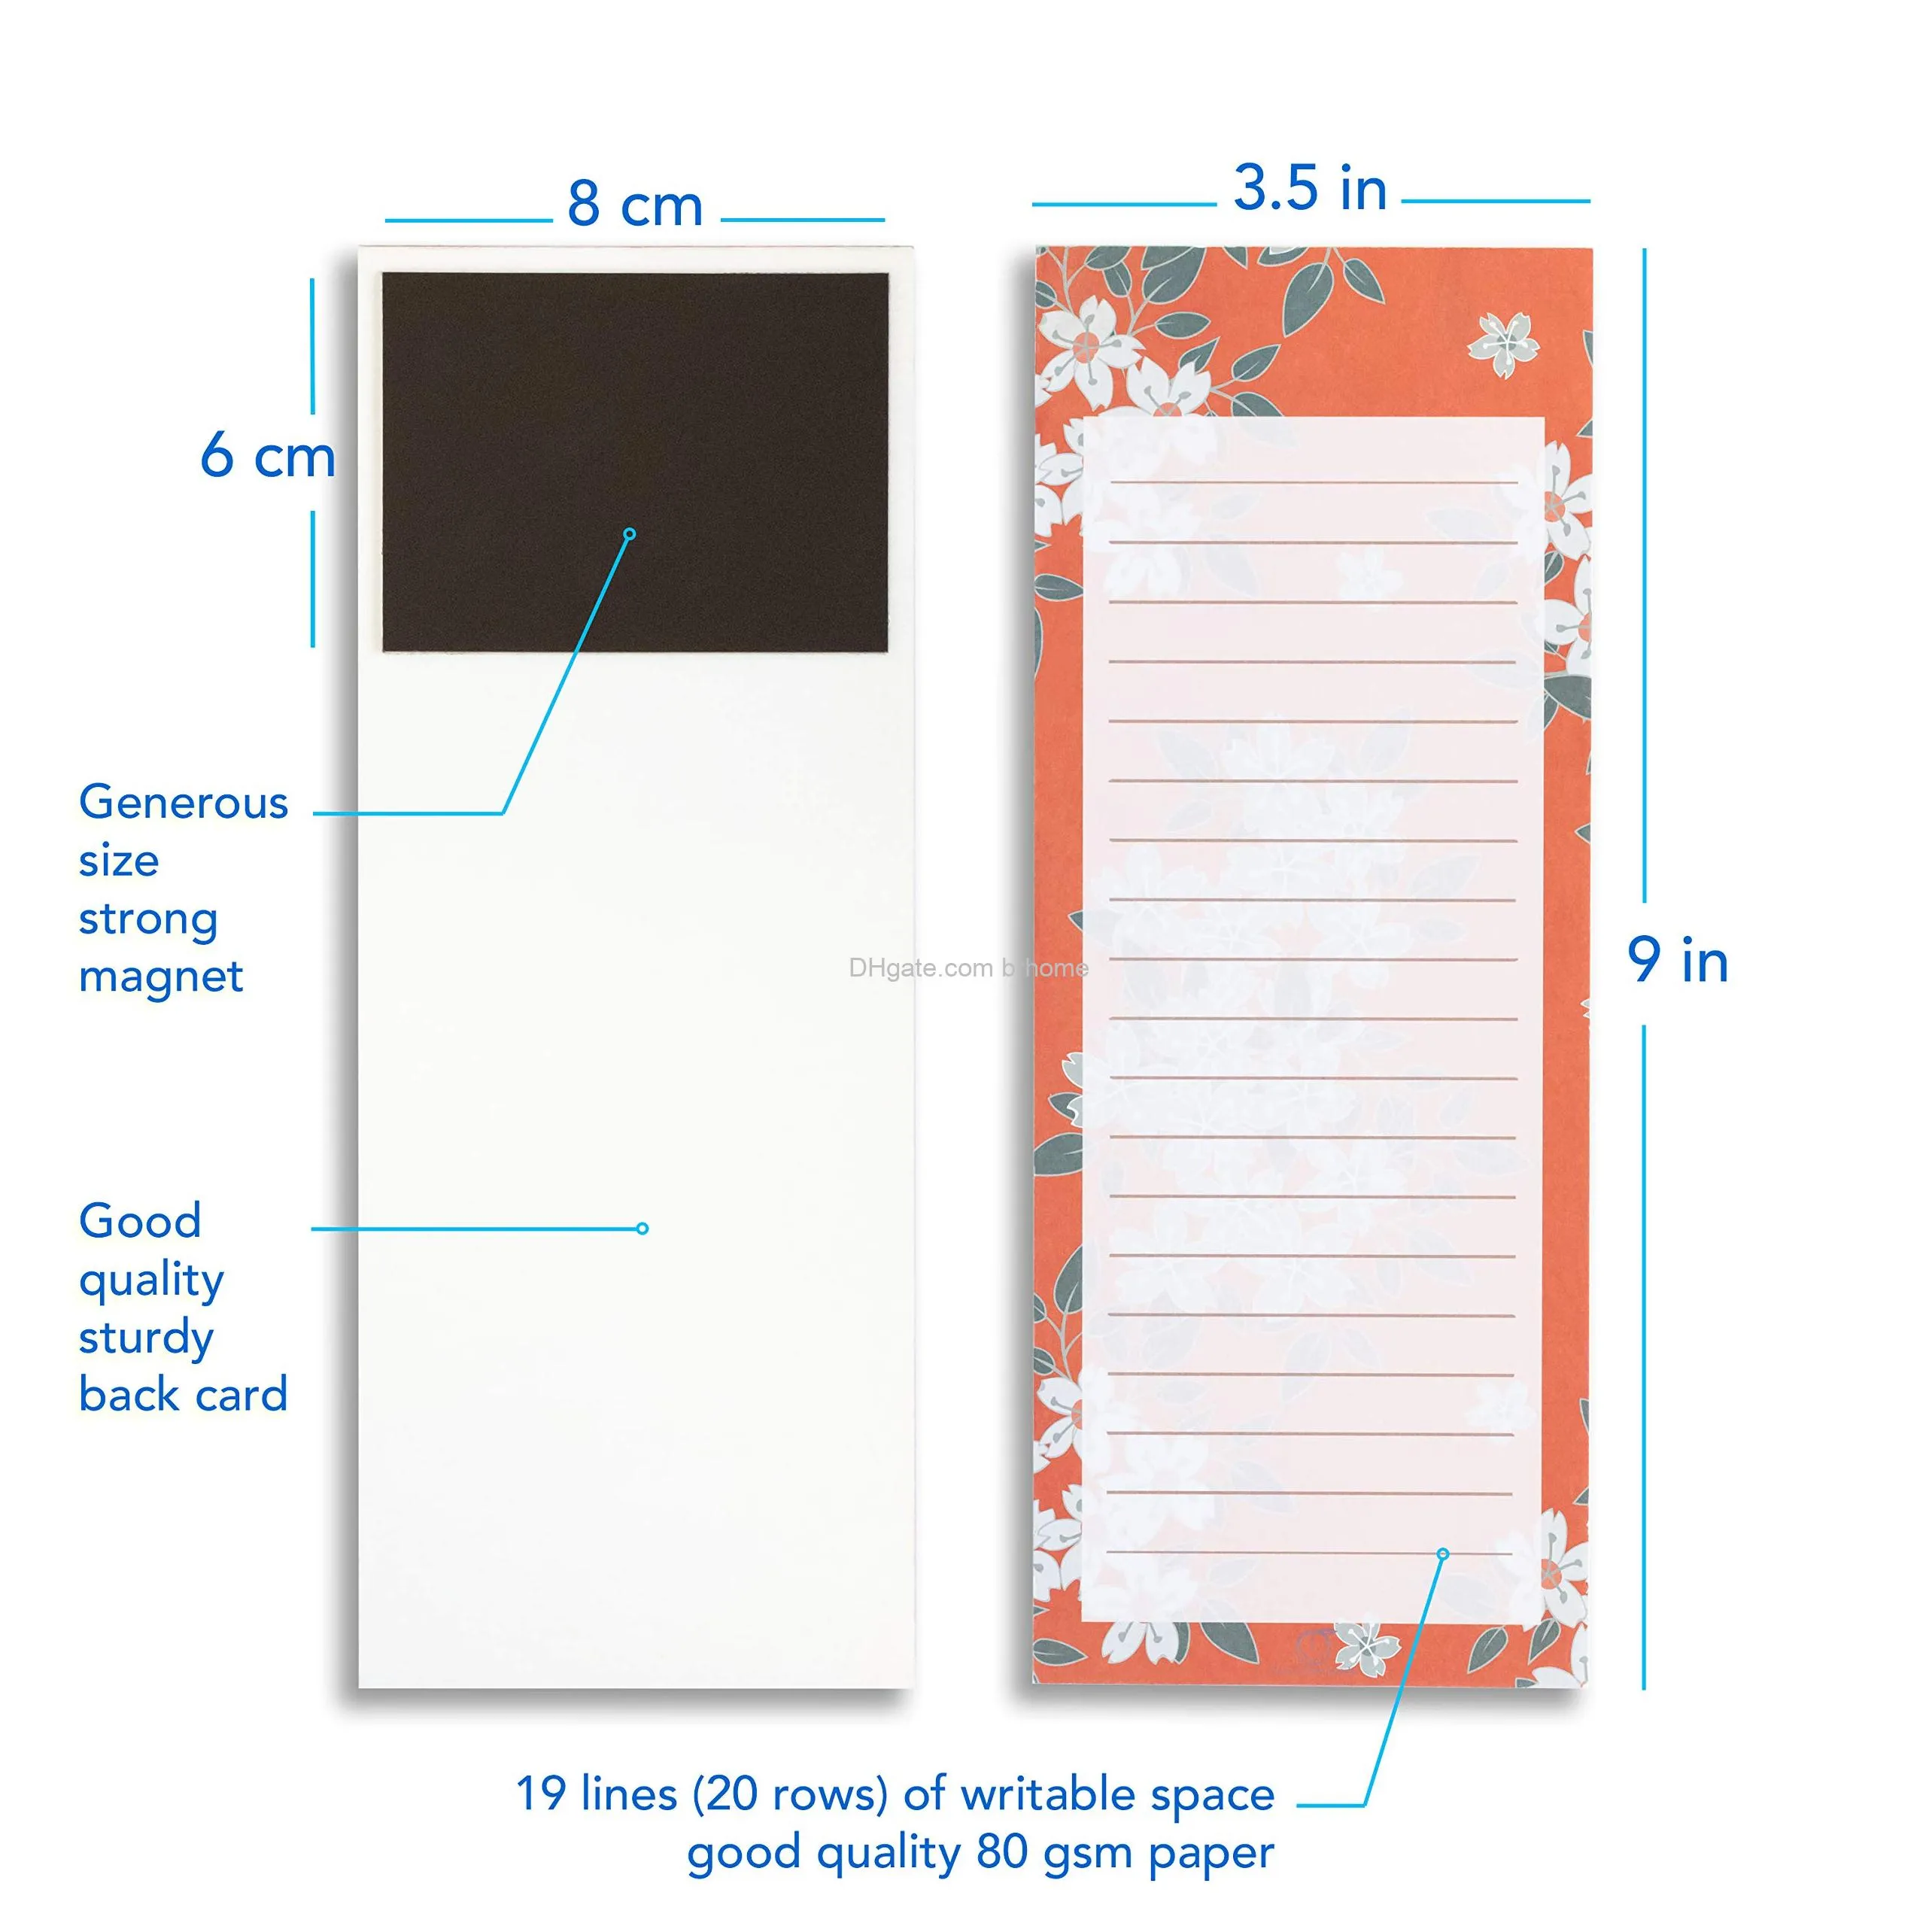 magnetic notepads 60 sheets per pad 3 5 x 9 for fridge kitchen shopping grocery todo list memo reminder note book stationery origaminotes onethousand waves